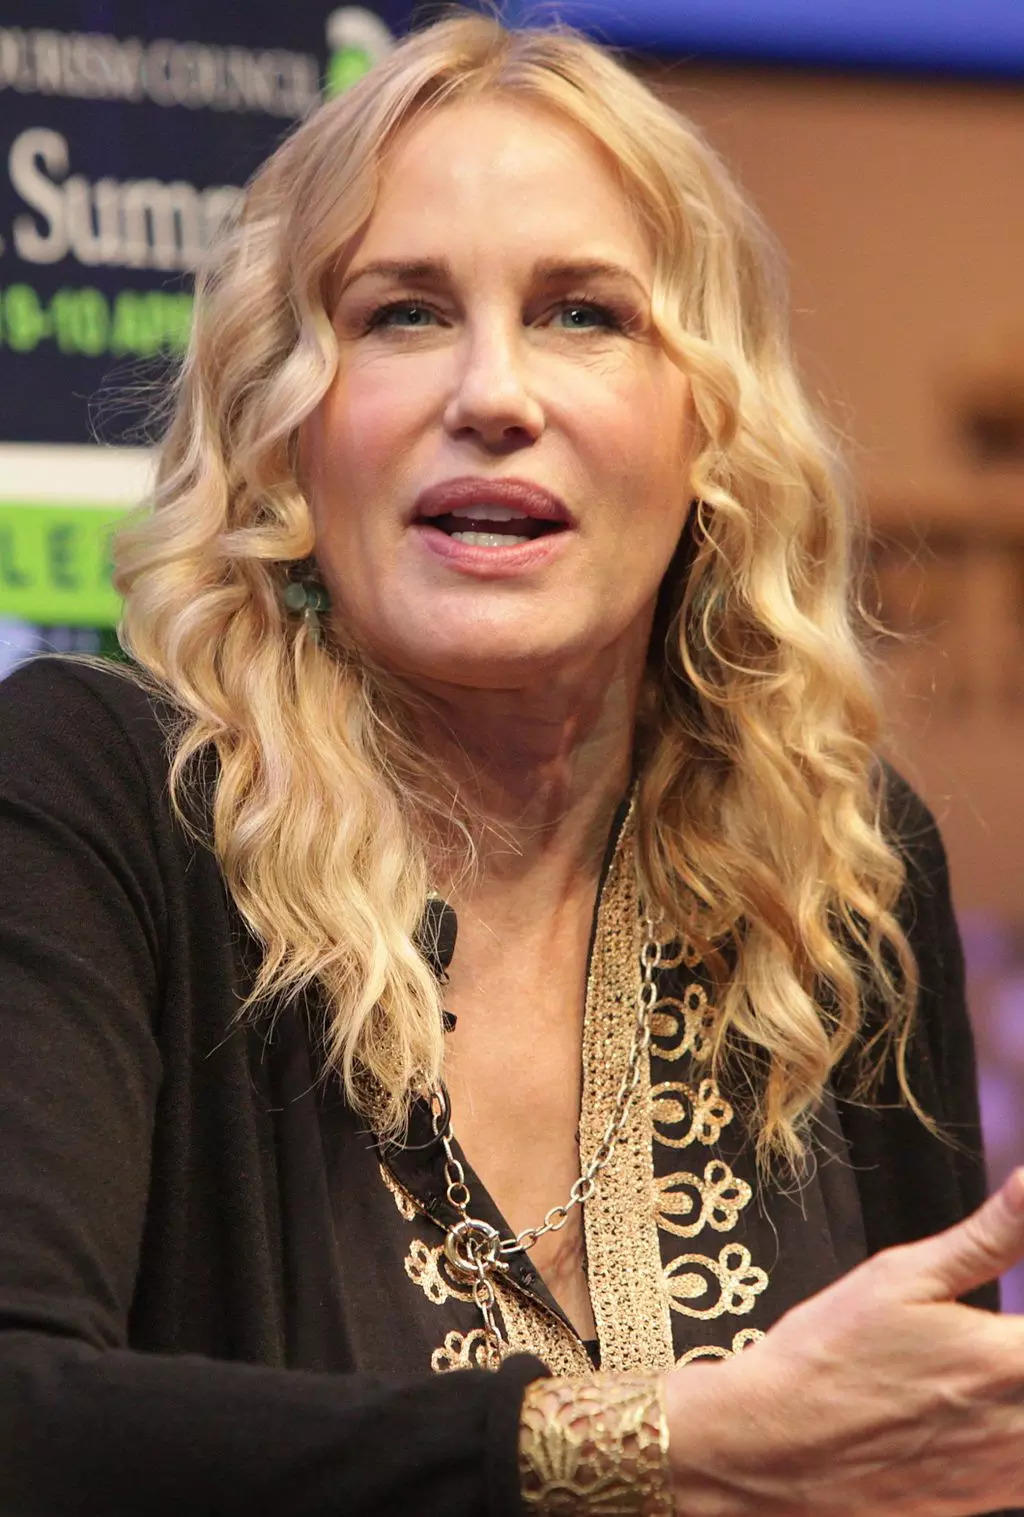 Daryl Hannah was diagnosed with autism early in life Image credit World Travel & Tourism Council CC BY 20 via Wikimedia Commons